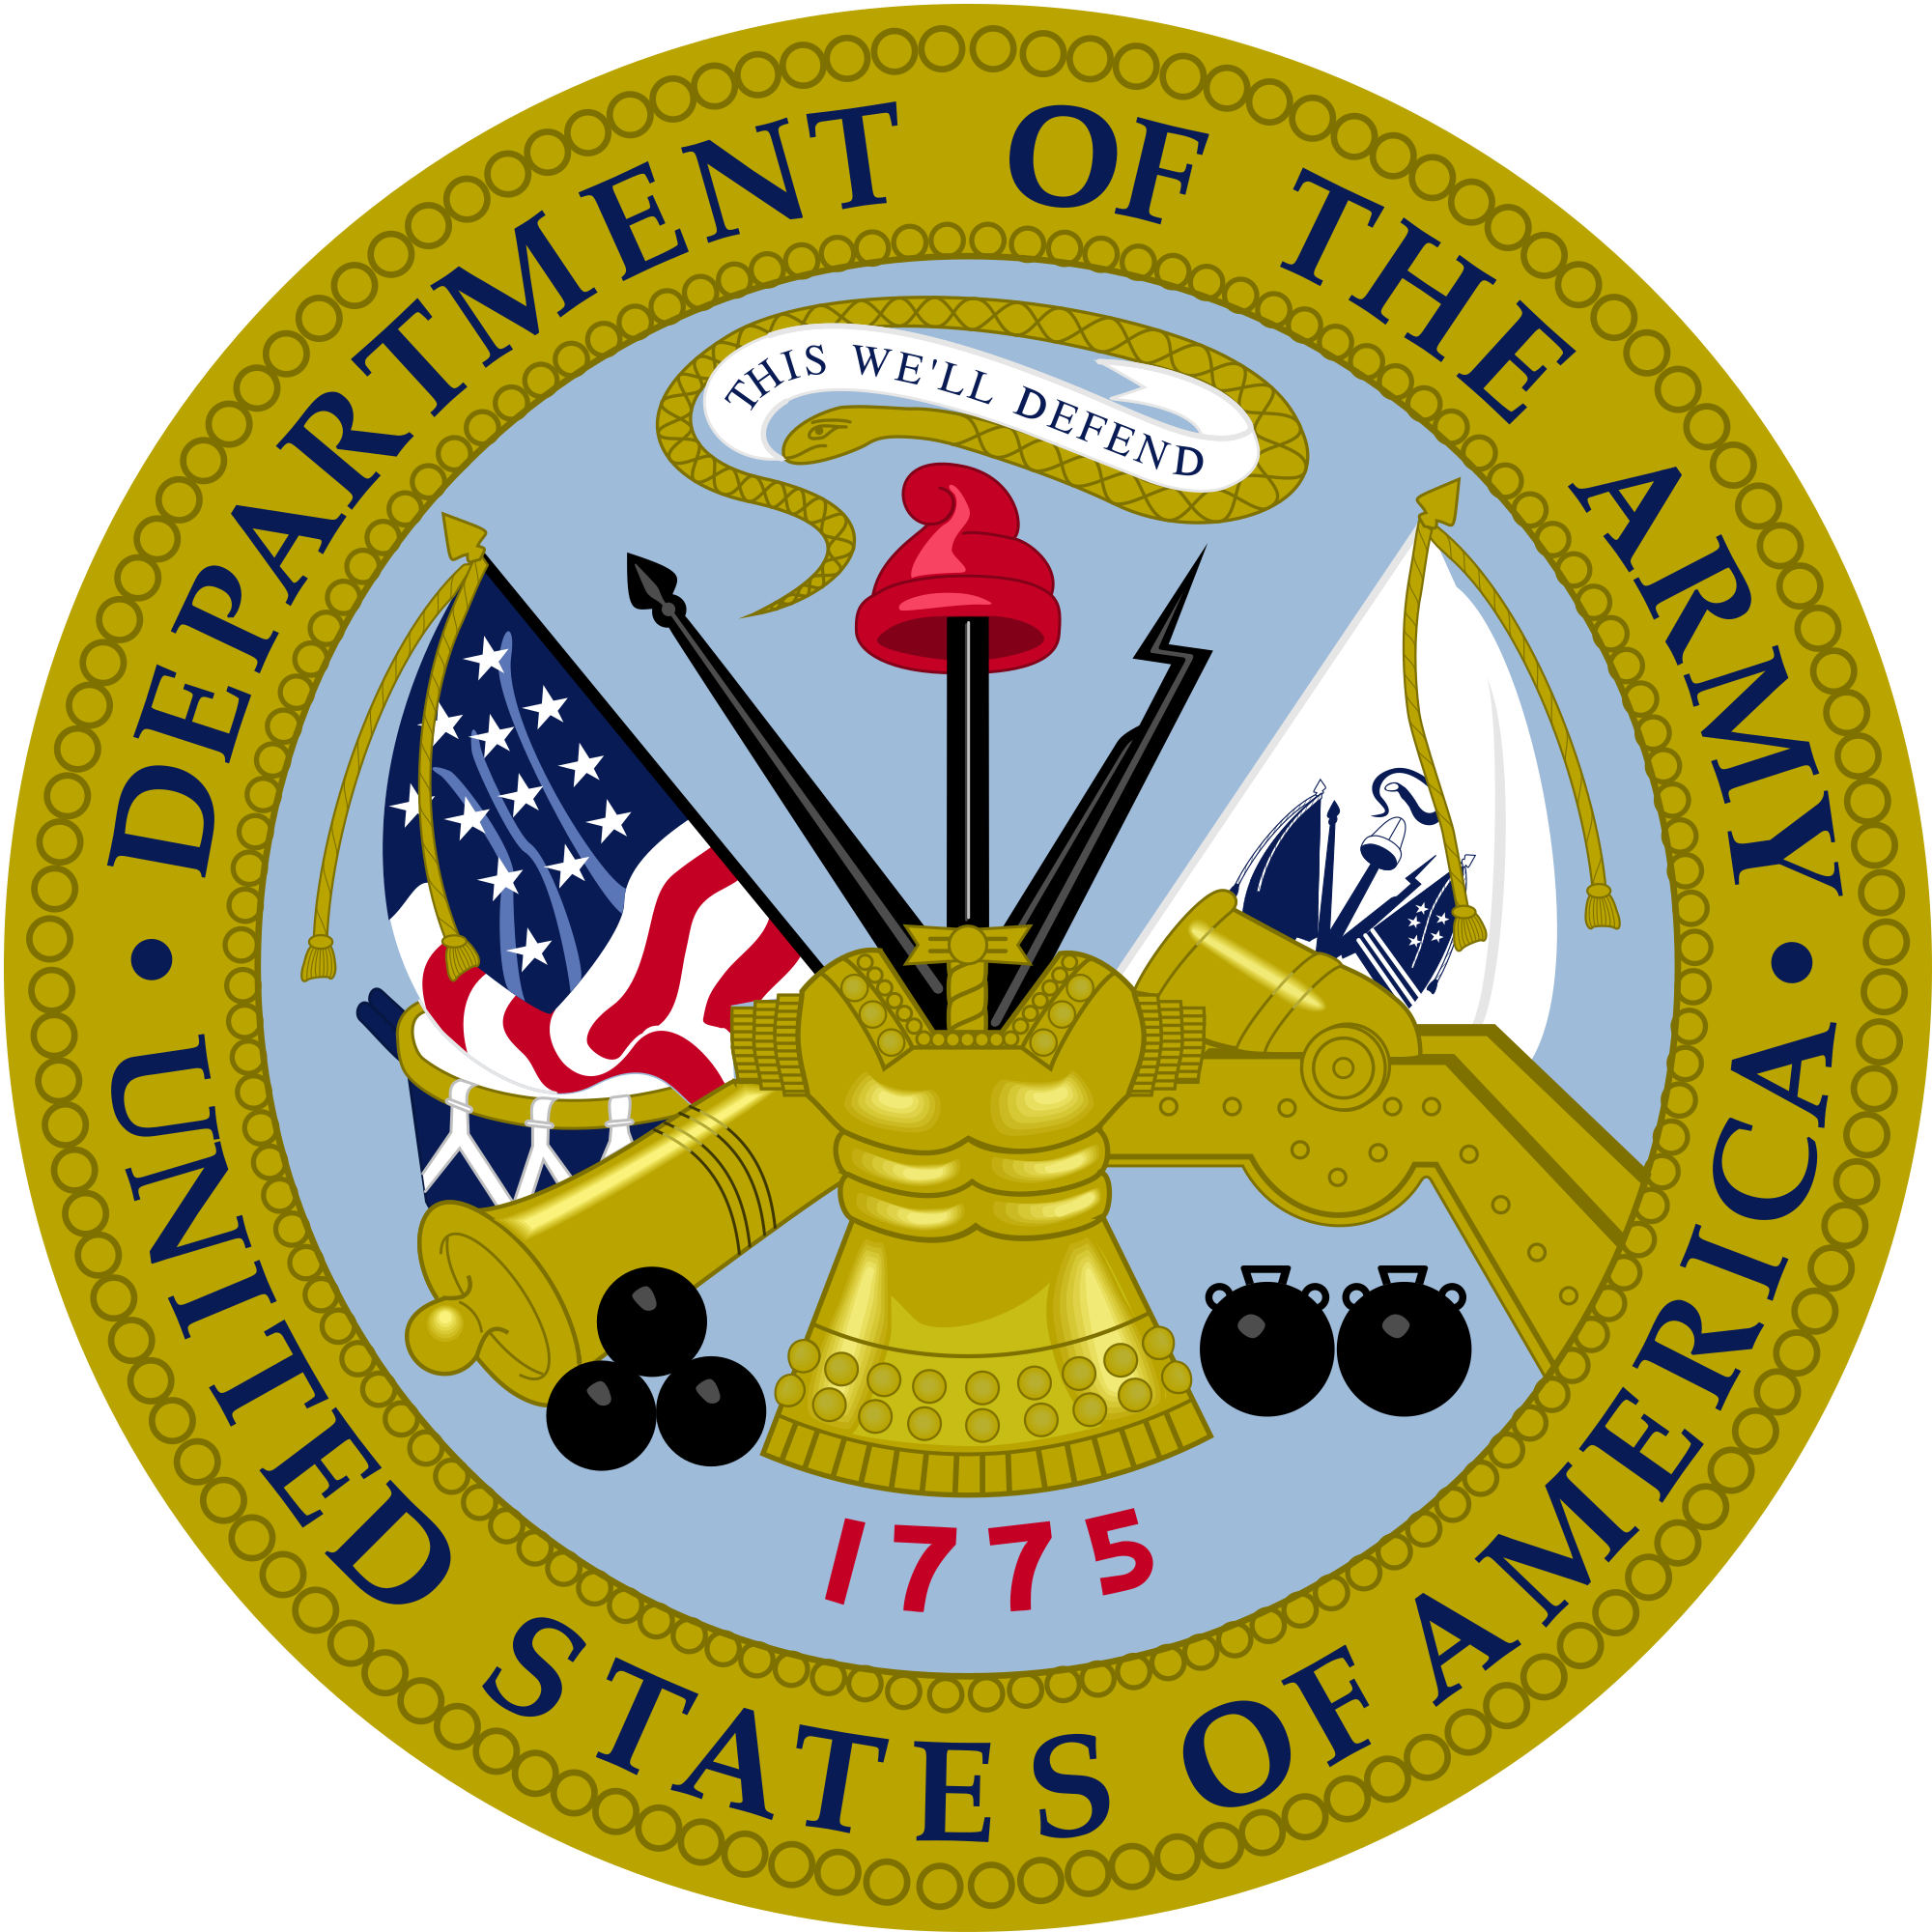 995749_us-army-seal-png.png